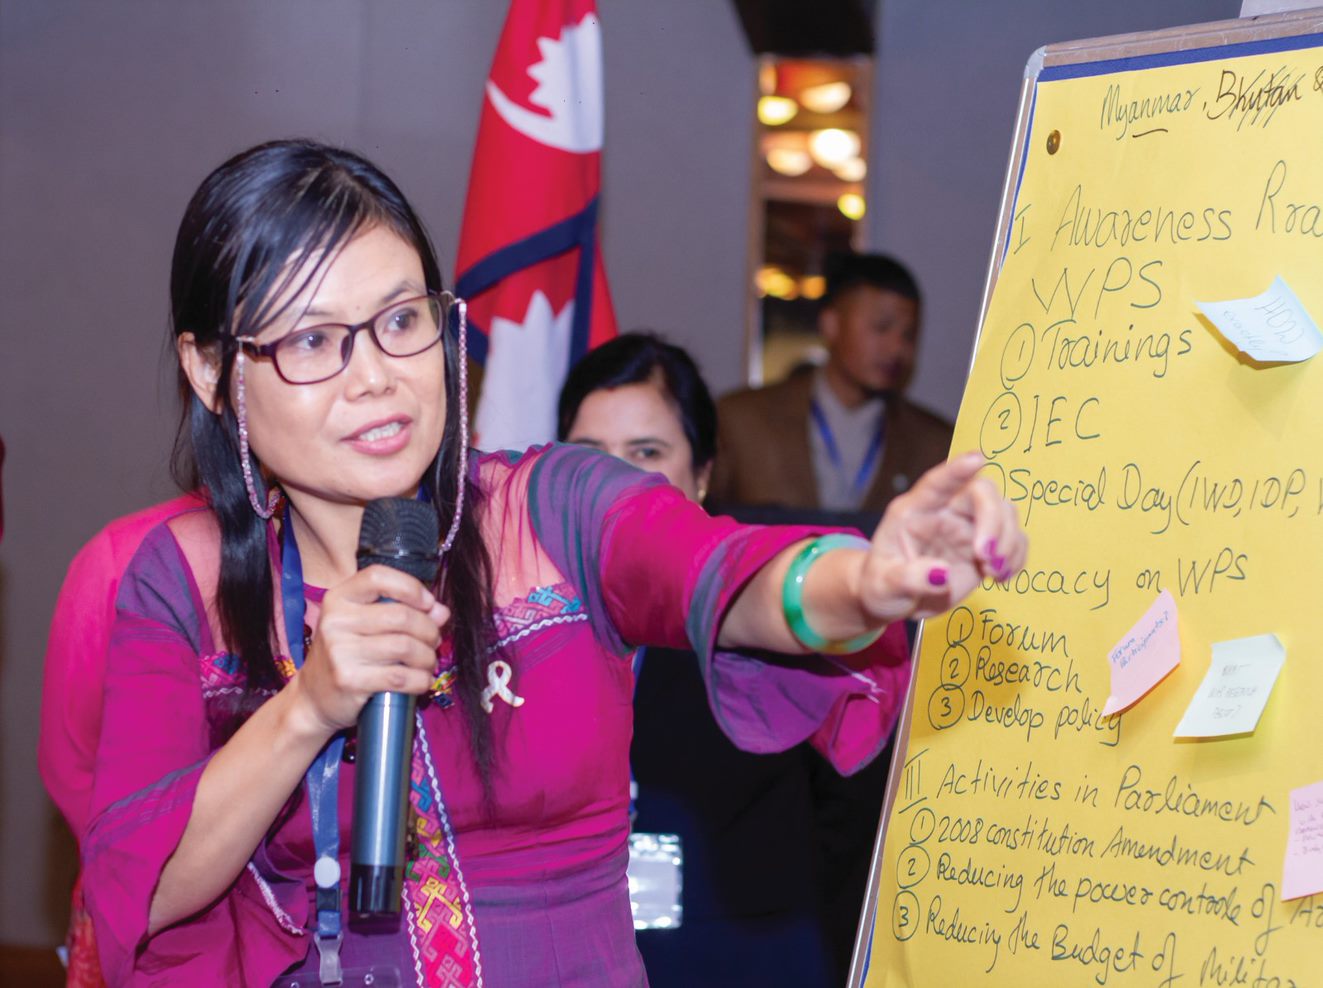 A woman leads the discussion at the seminar using a presentation board.